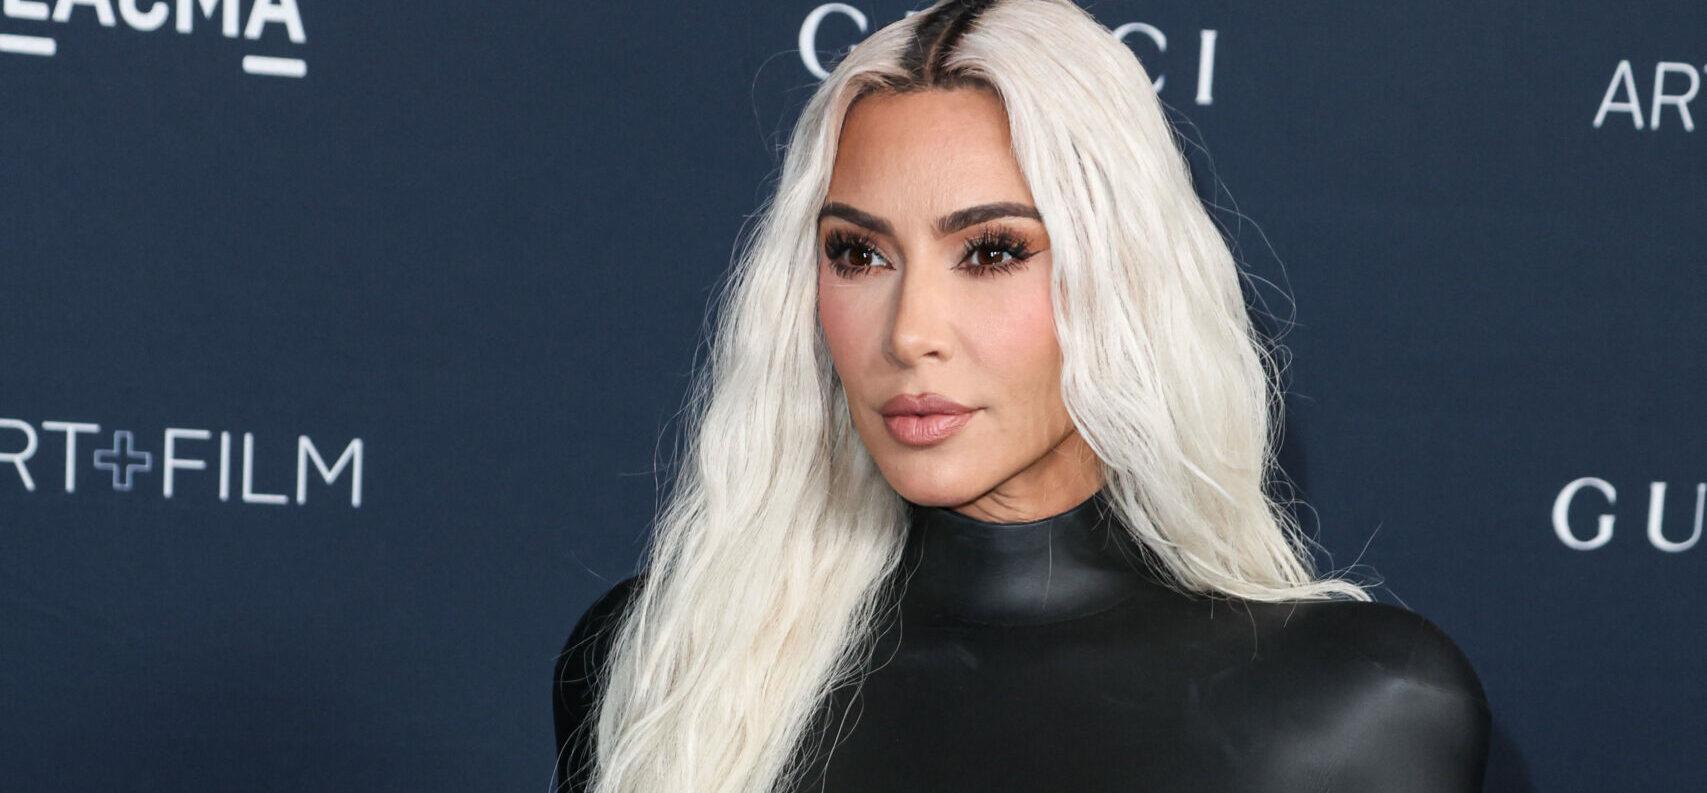 Kim Kardashian Says She’s Taking Acting Lessons For Her Role In ‘American Horror Story: Delicate’